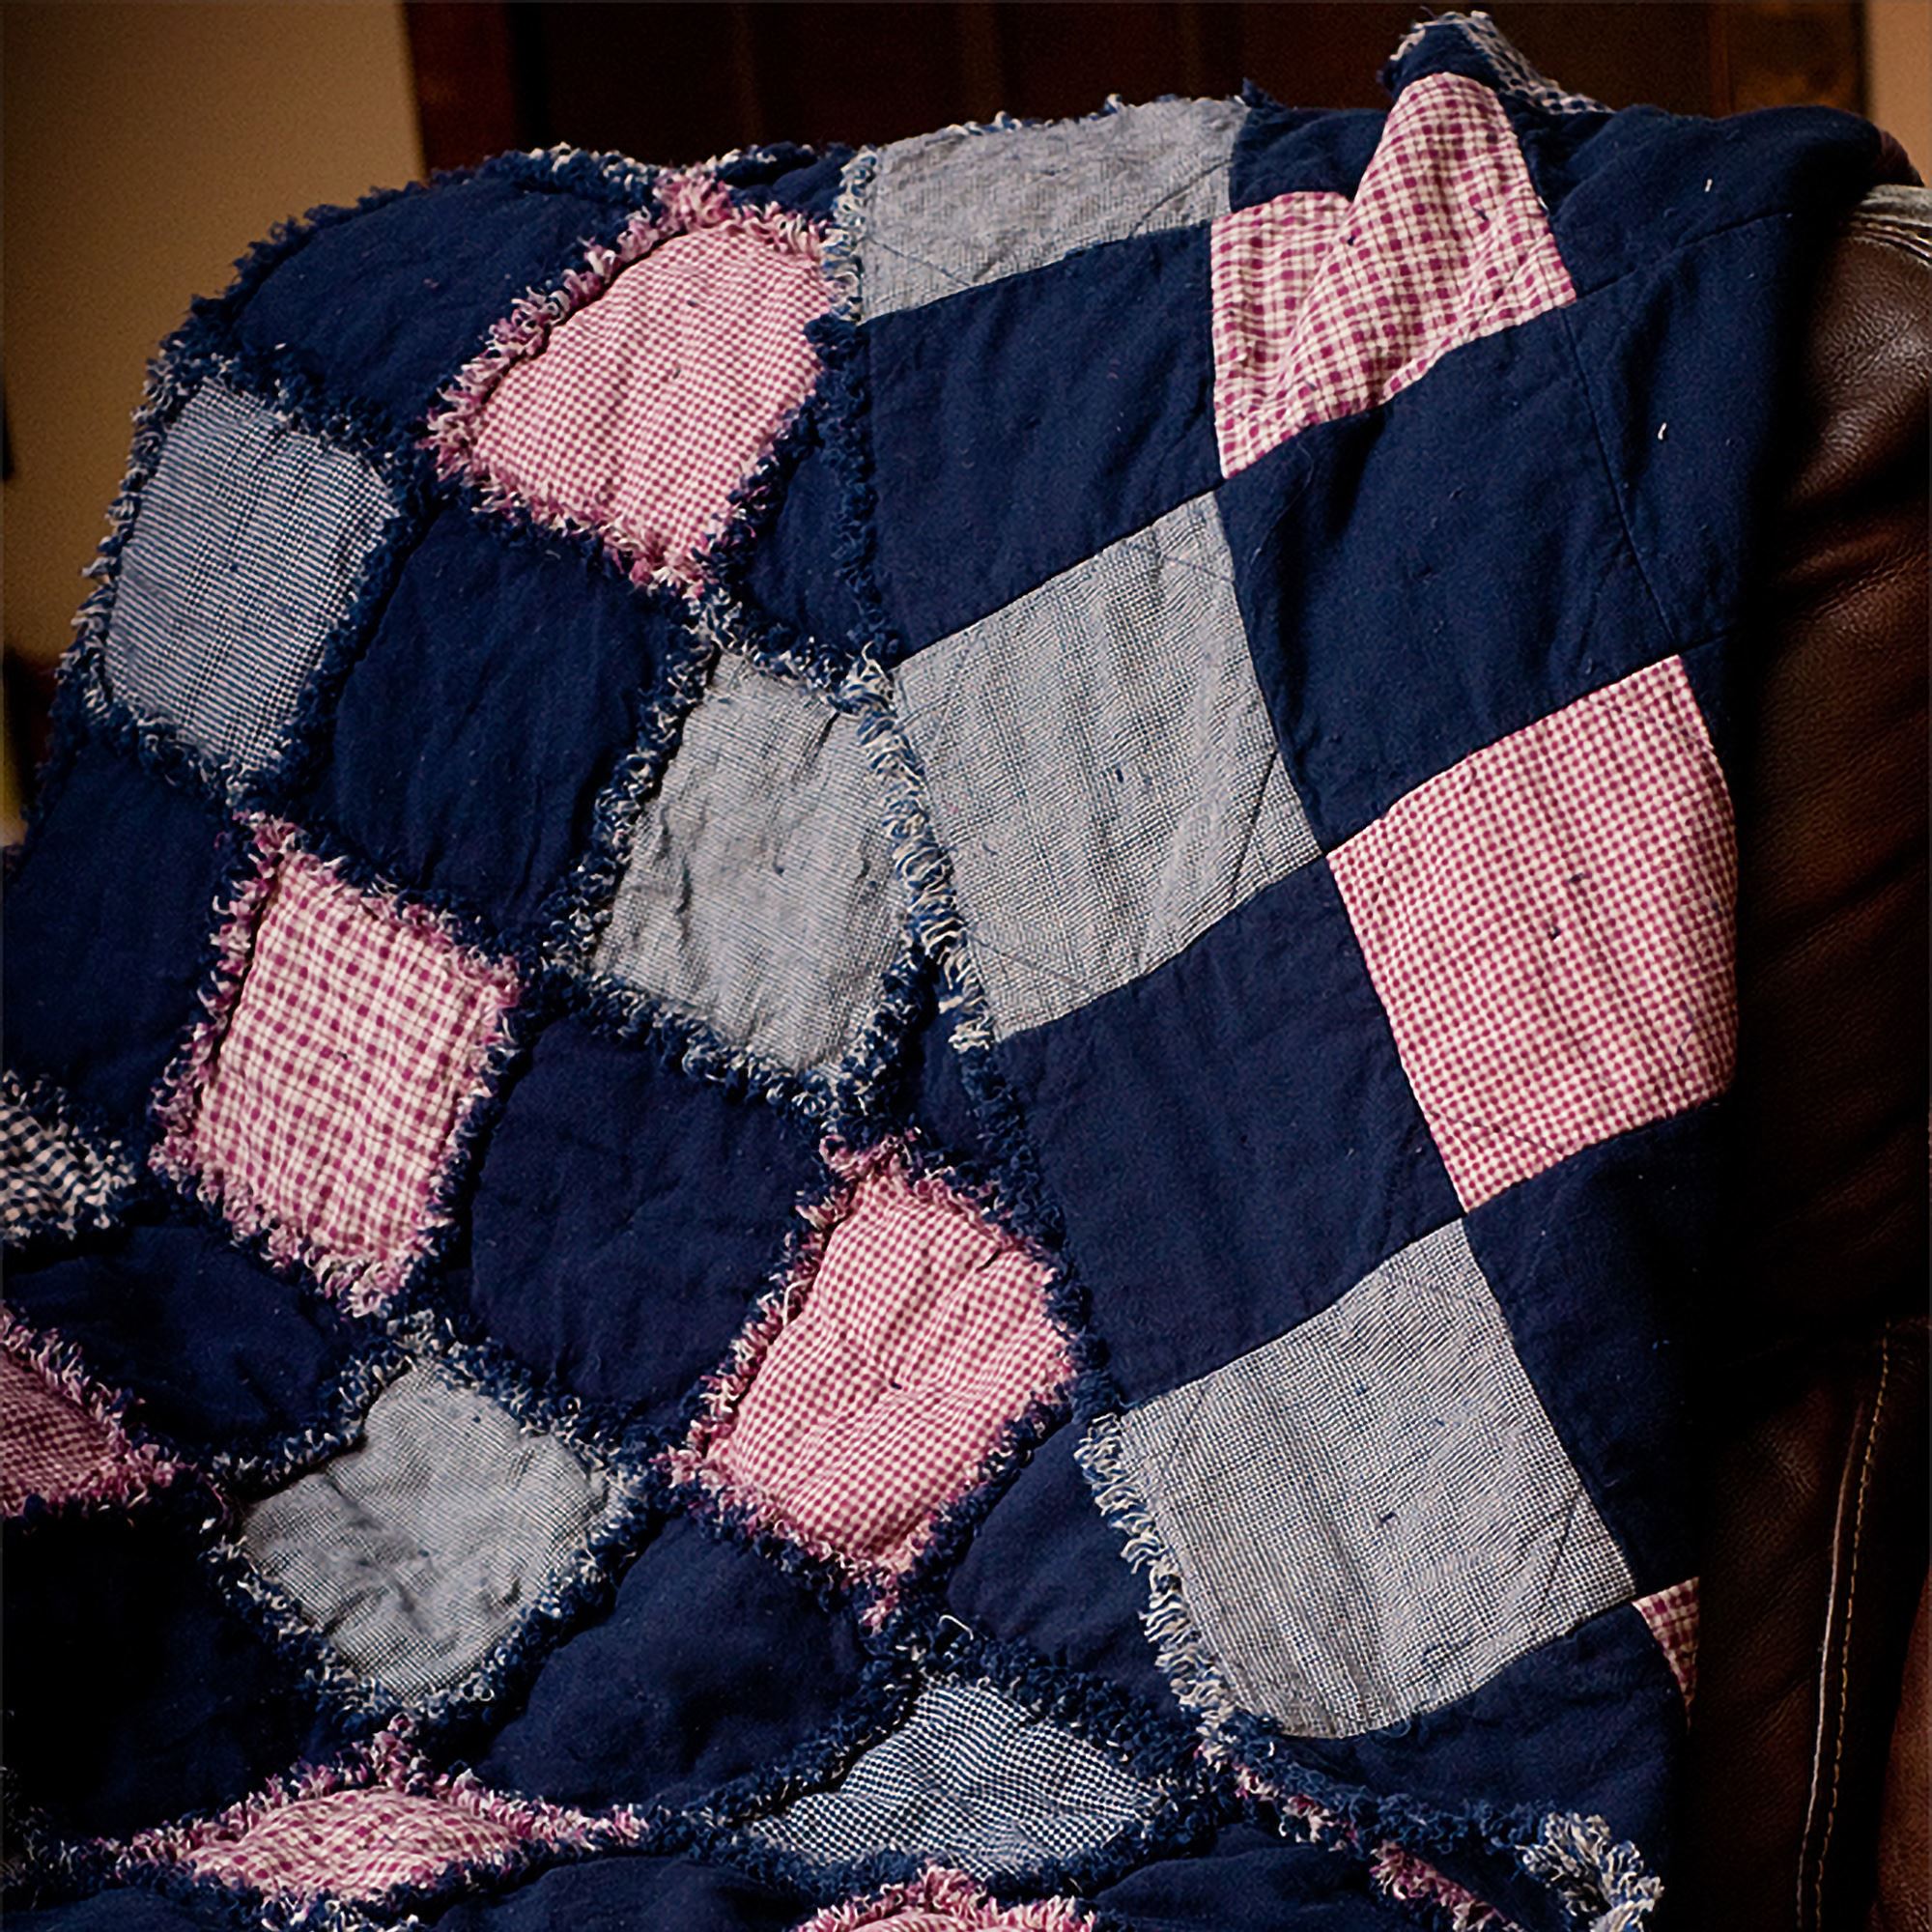 Crafting a Rag Quilt